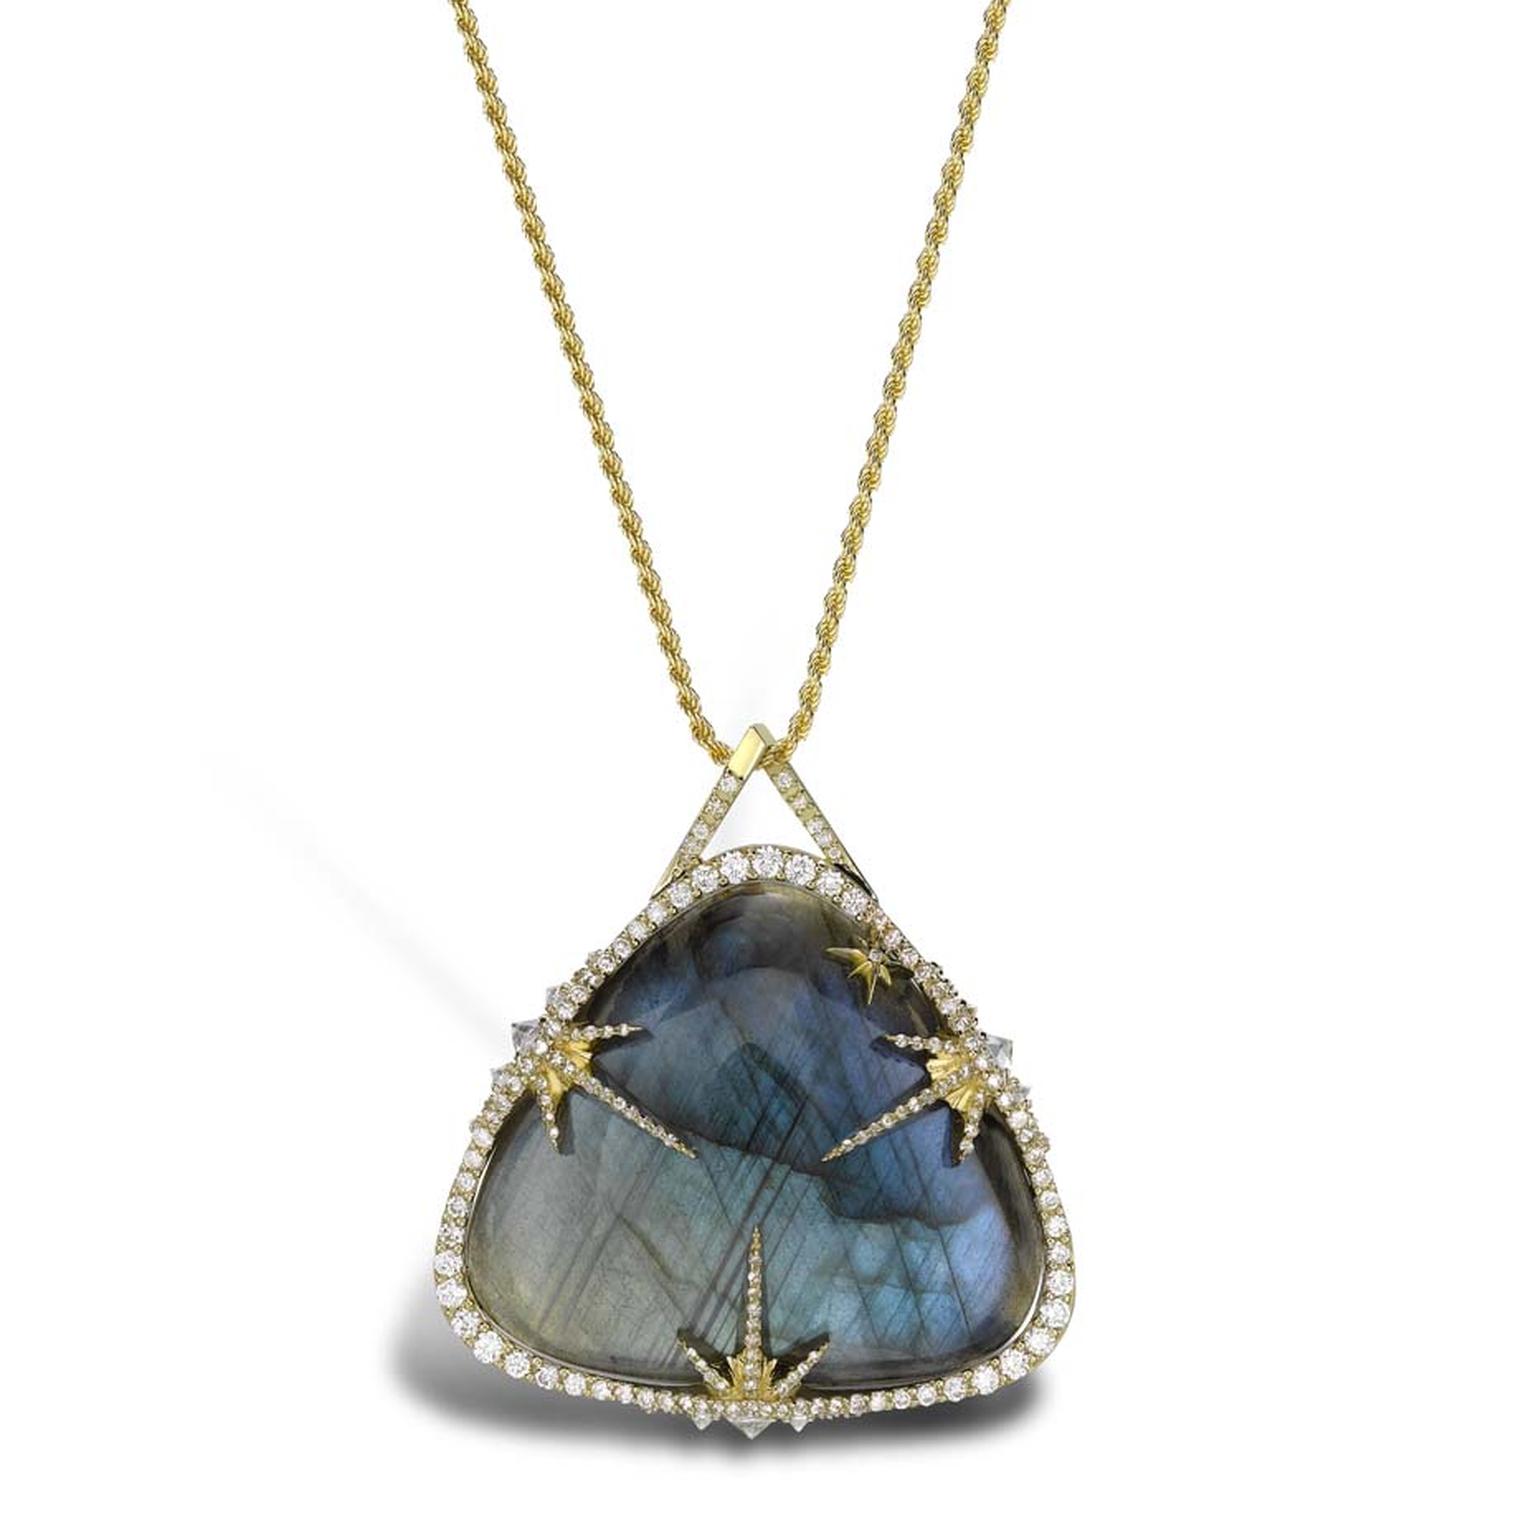 Venyx Theiya collection Obscura pendant in yellow gold with diamonds and labradorite.